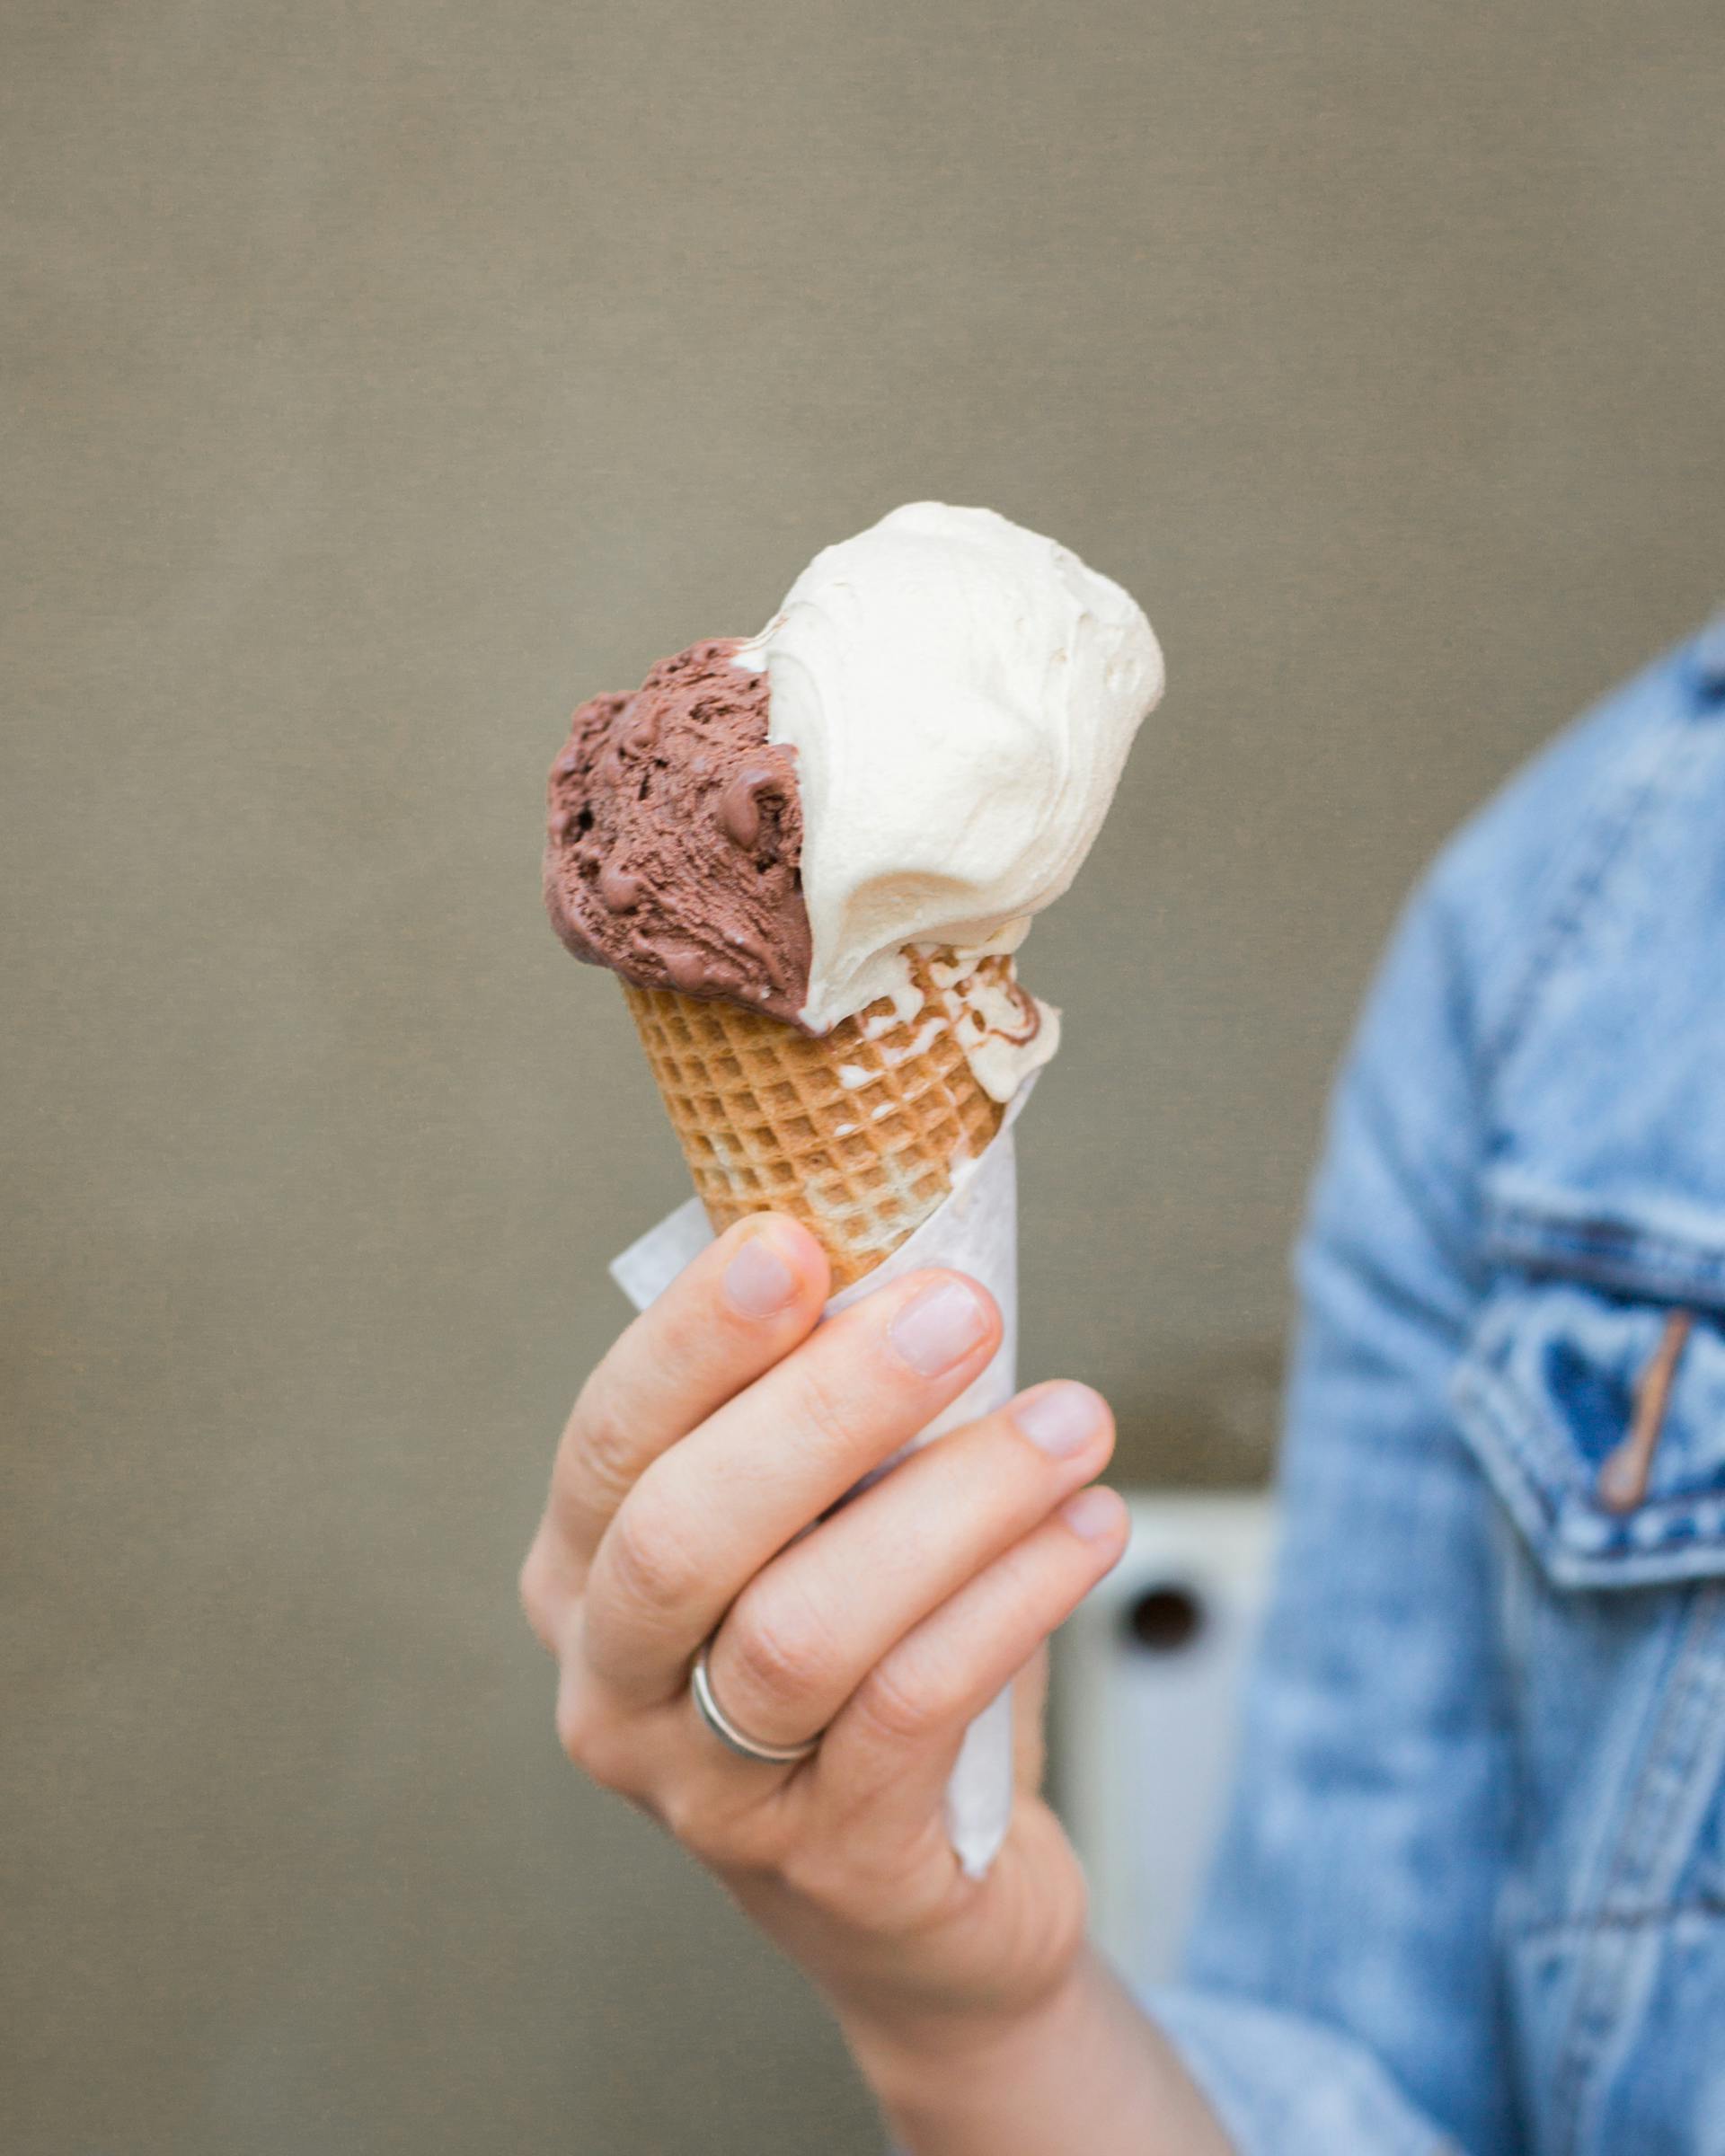 A person holding an ice cream cone | Source: Pexels